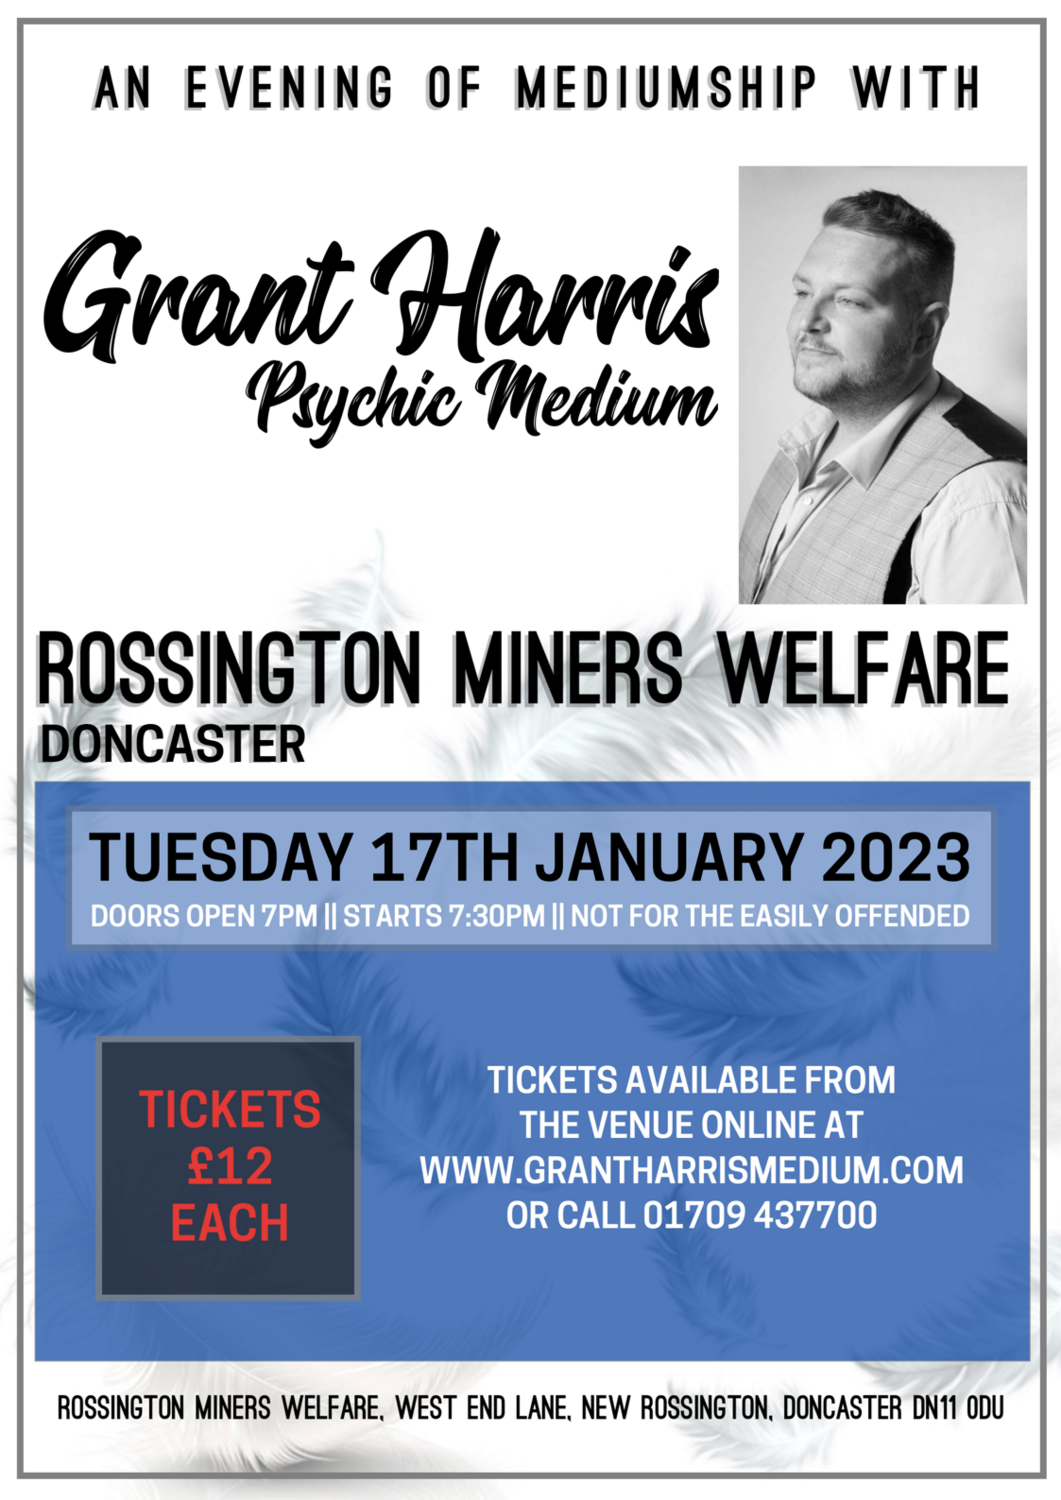 Rossington Miners Welfare, Doncaster, Tuesday 17th January 2023